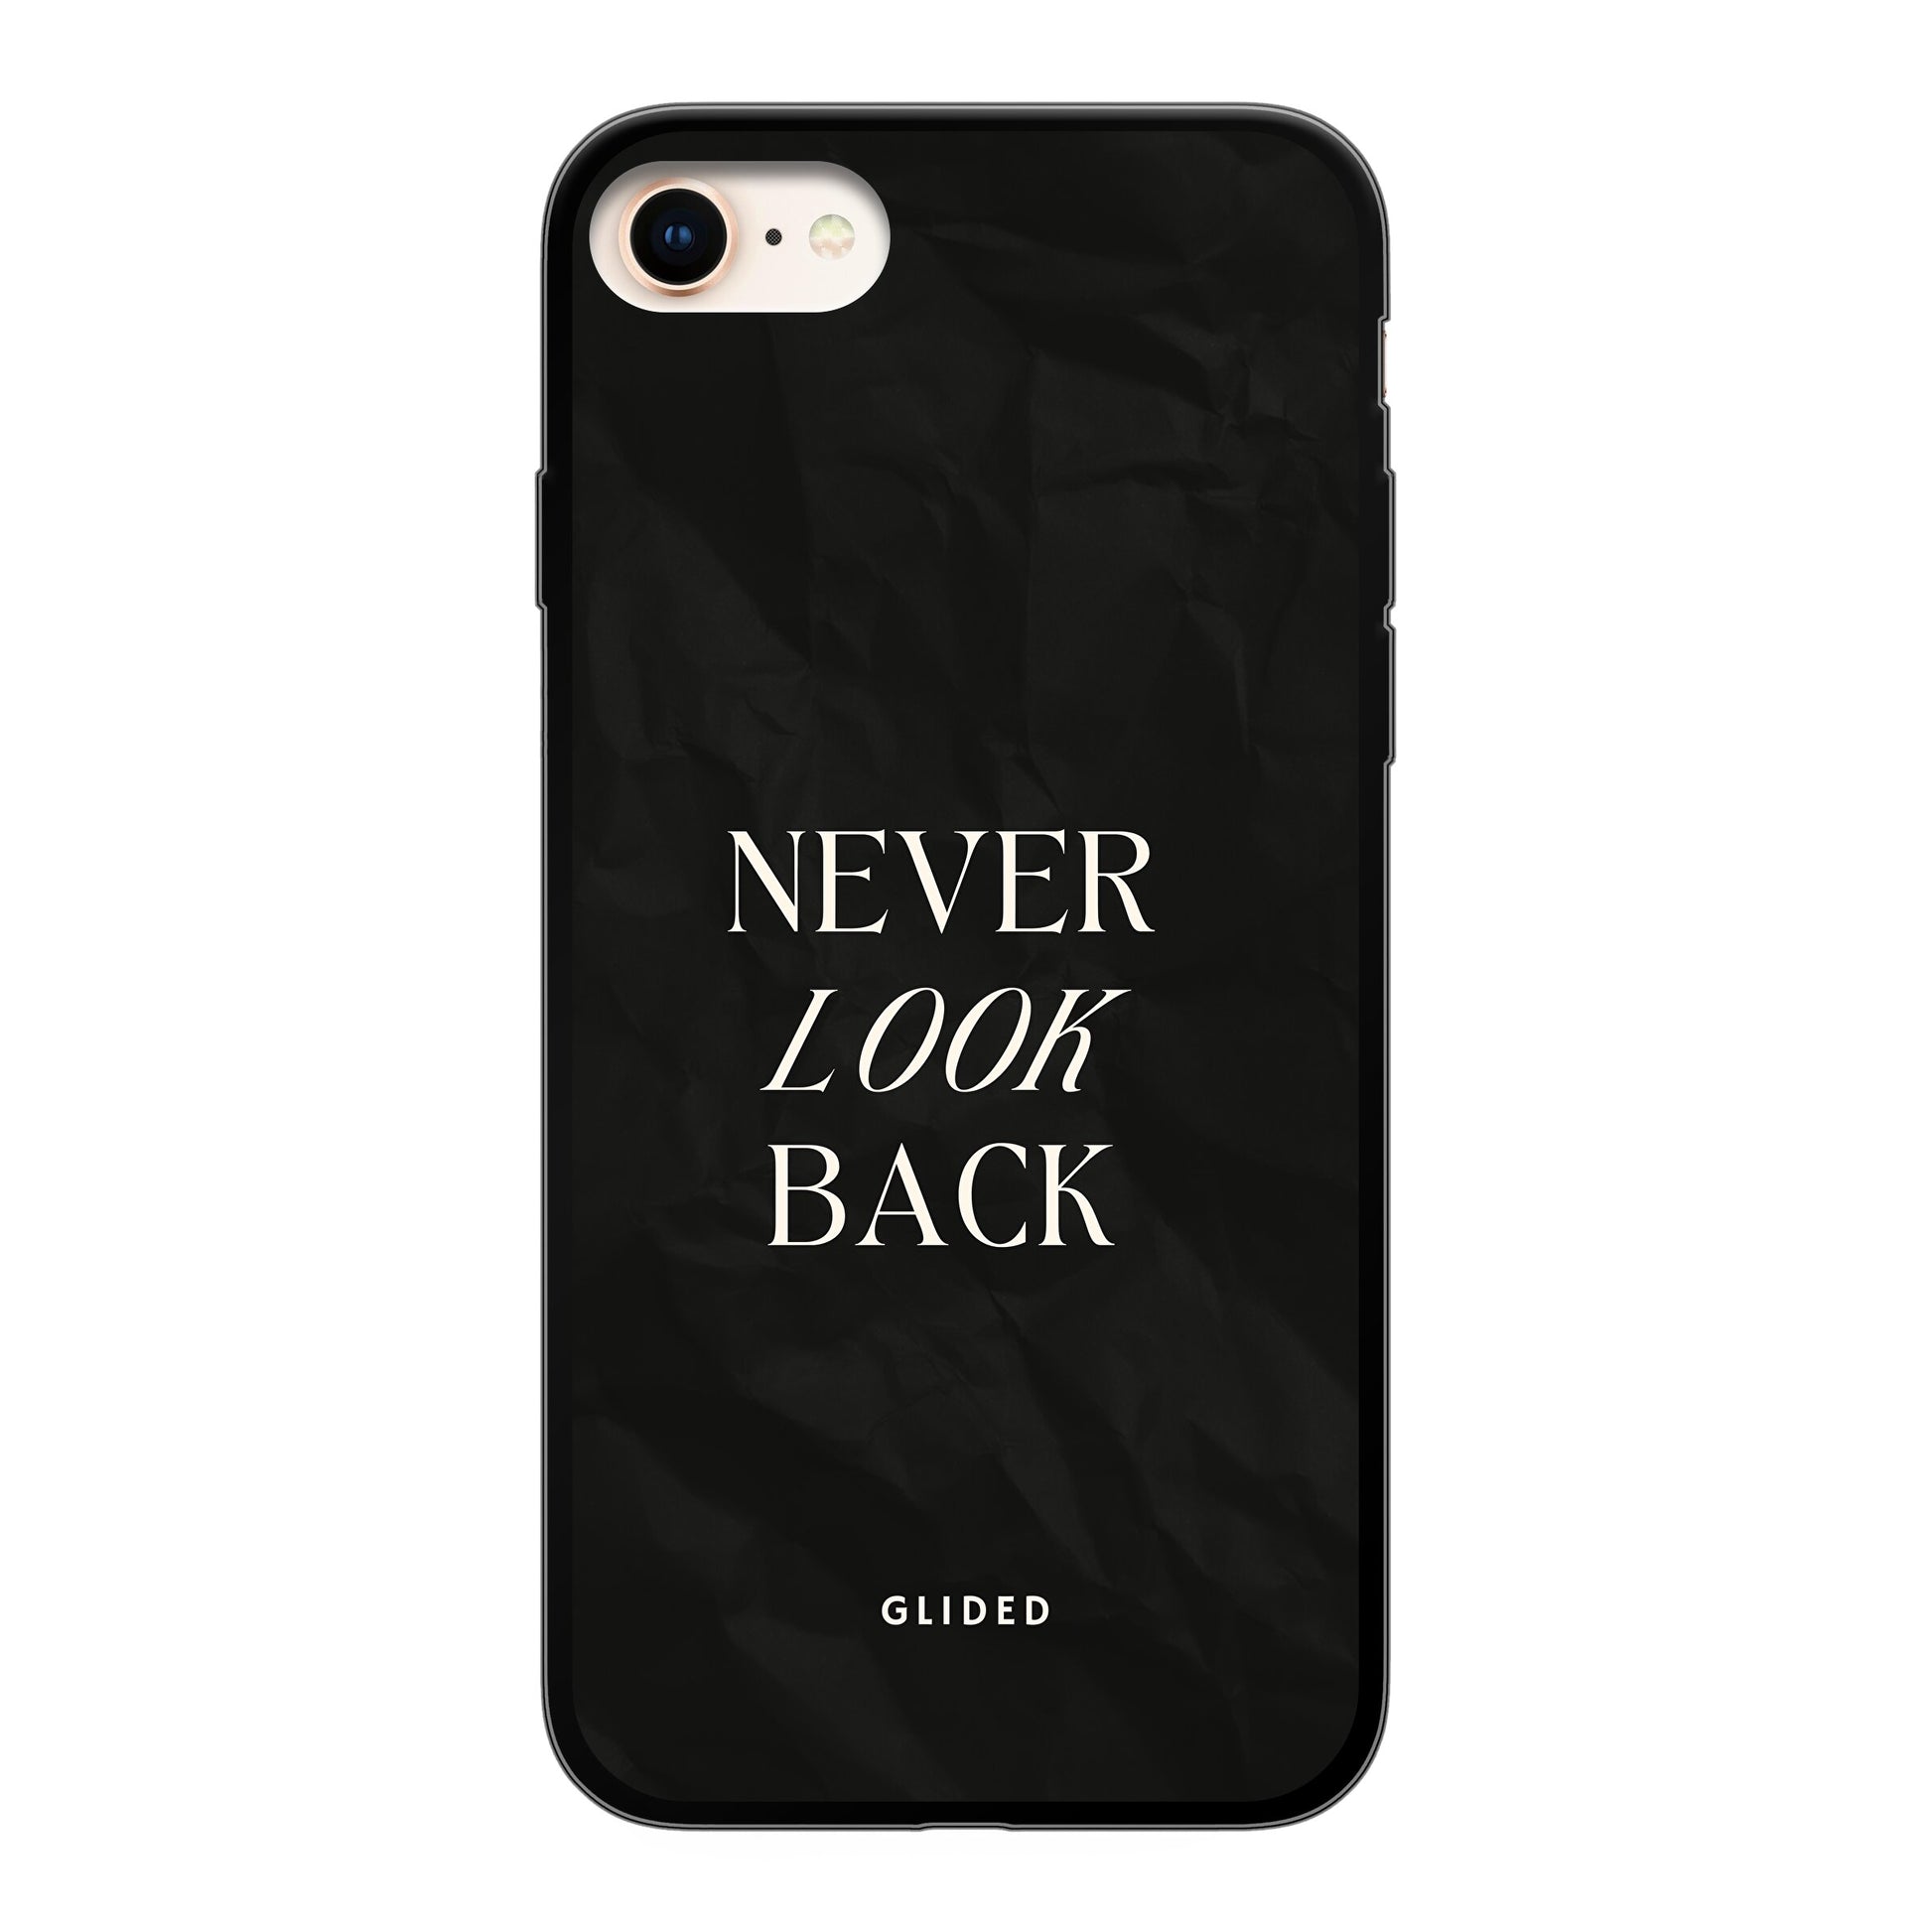 Never Back - iPhone 7 Handyhülle Soft case